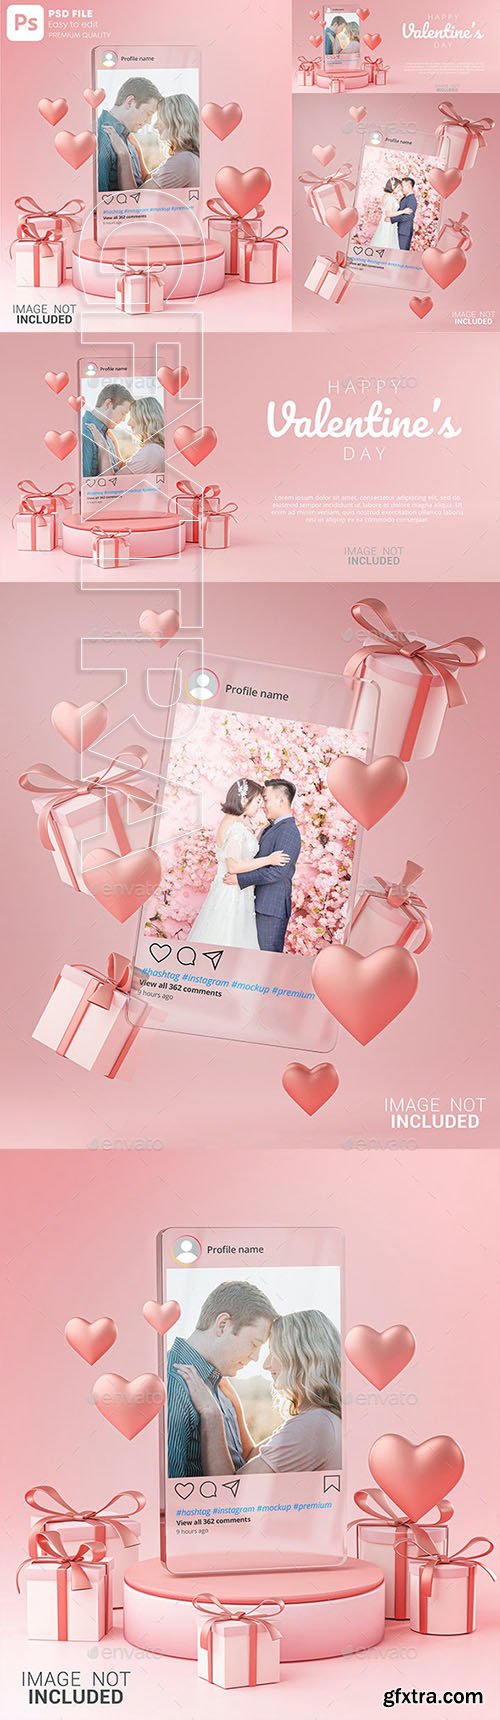 GraphicRiver - Instagram Post Mockup on Glass Template Valentine Wedding Love Heart Shape and Gift Box 3D Rendering 30090315